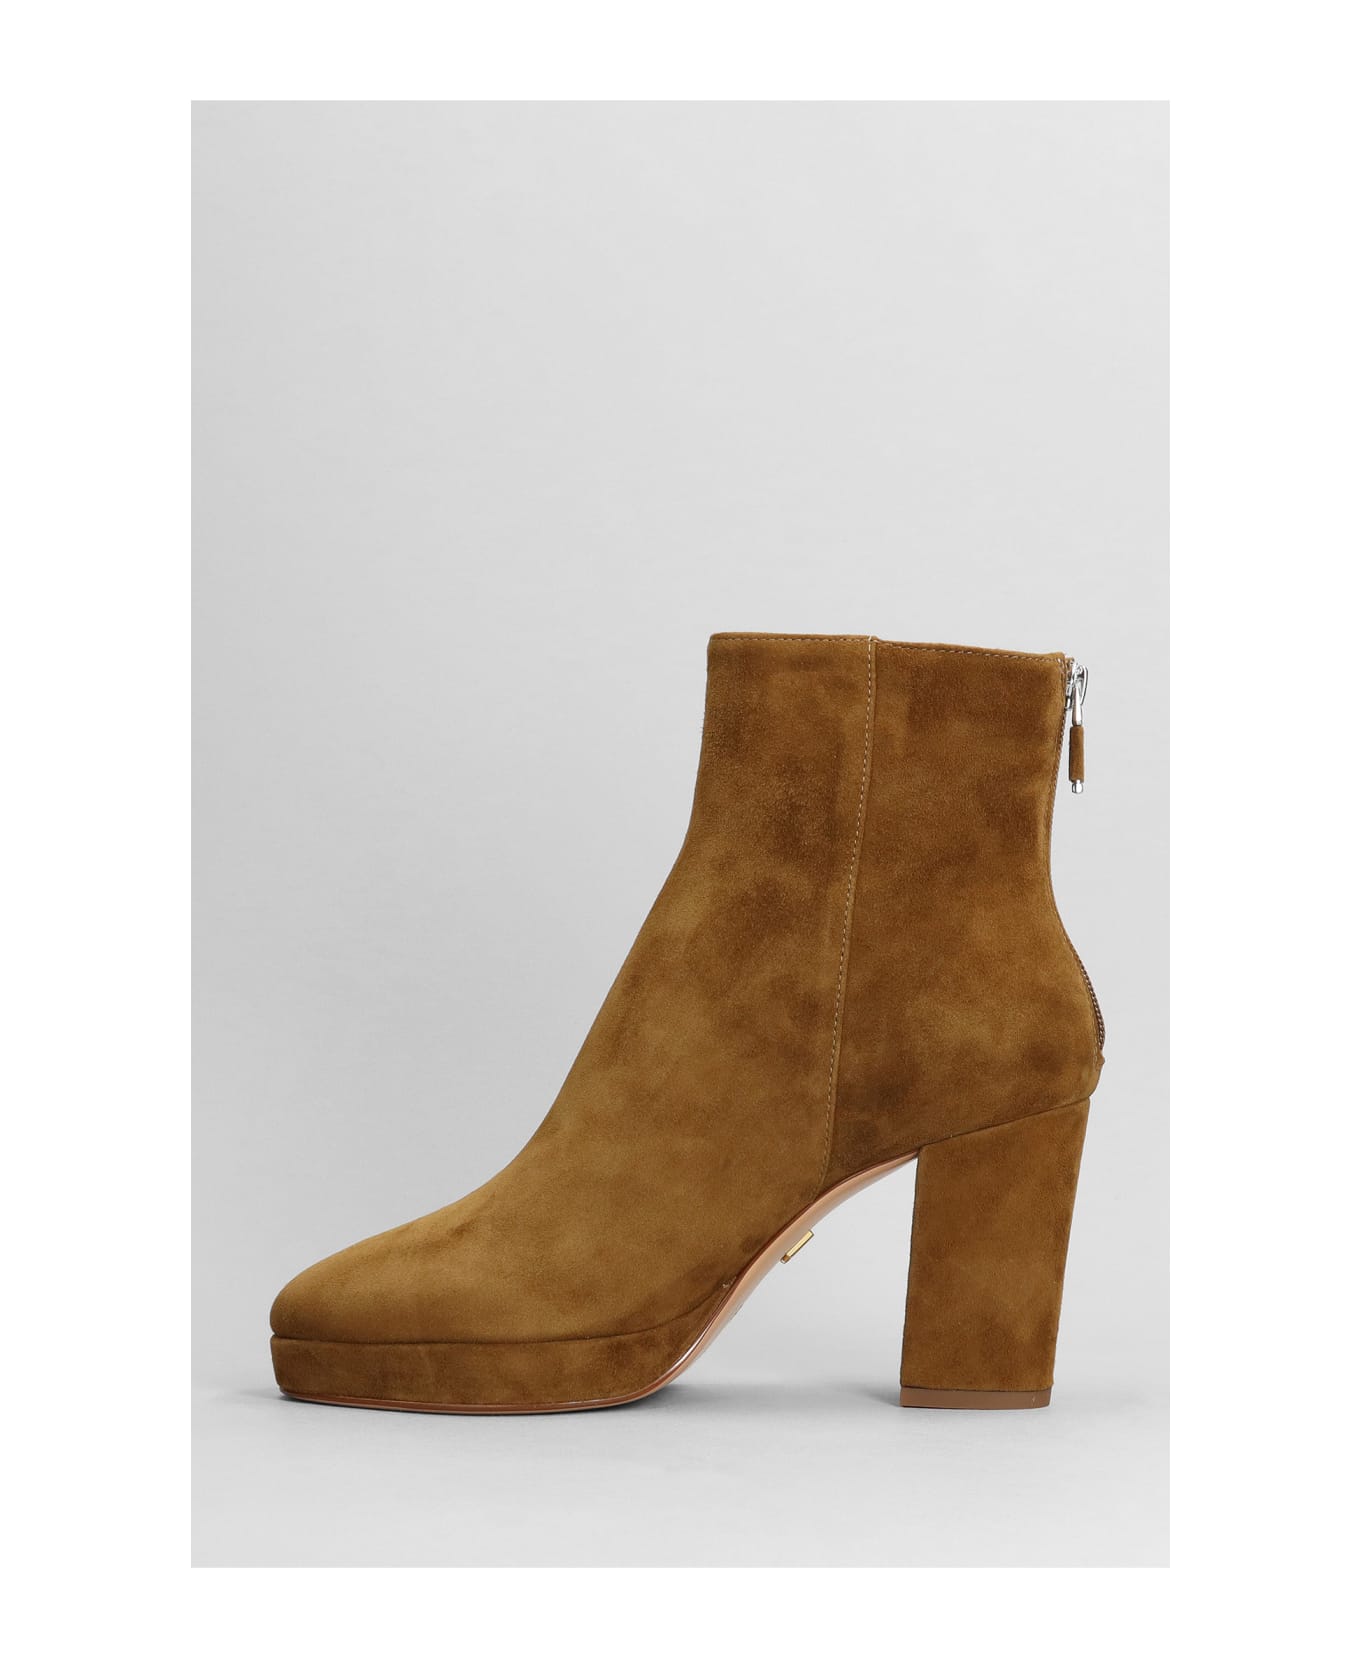 Lola Cruz High Heels Ankle Boots In Leather Color Suede - leather color